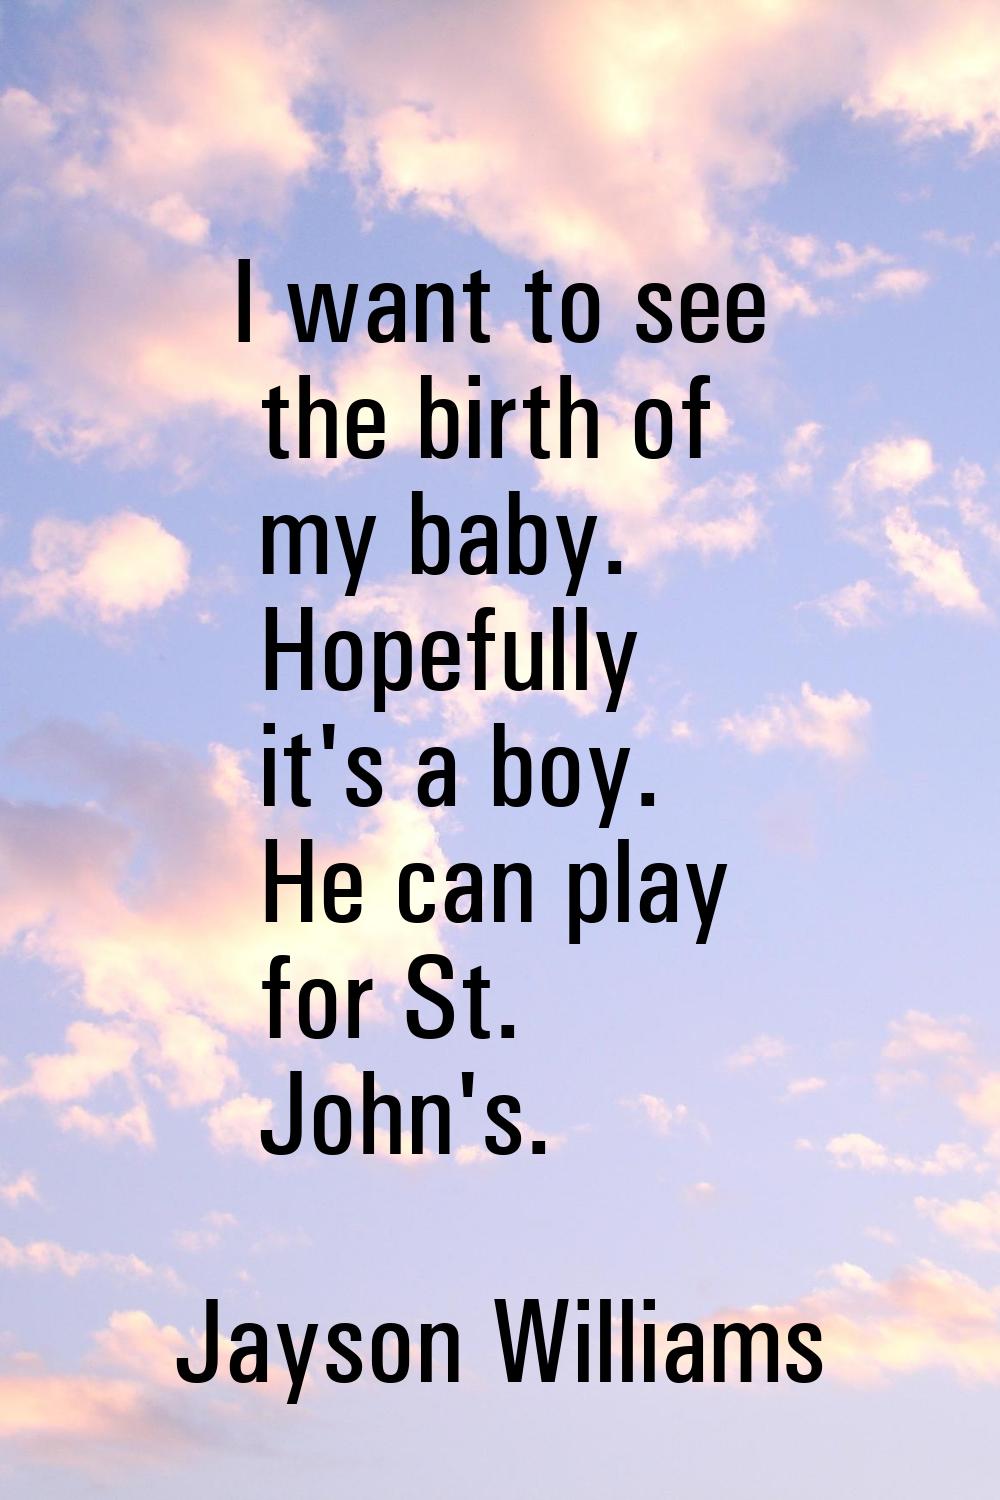 I want to see the birth of my baby. Hopefully it's a boy. He can play for St. John's.